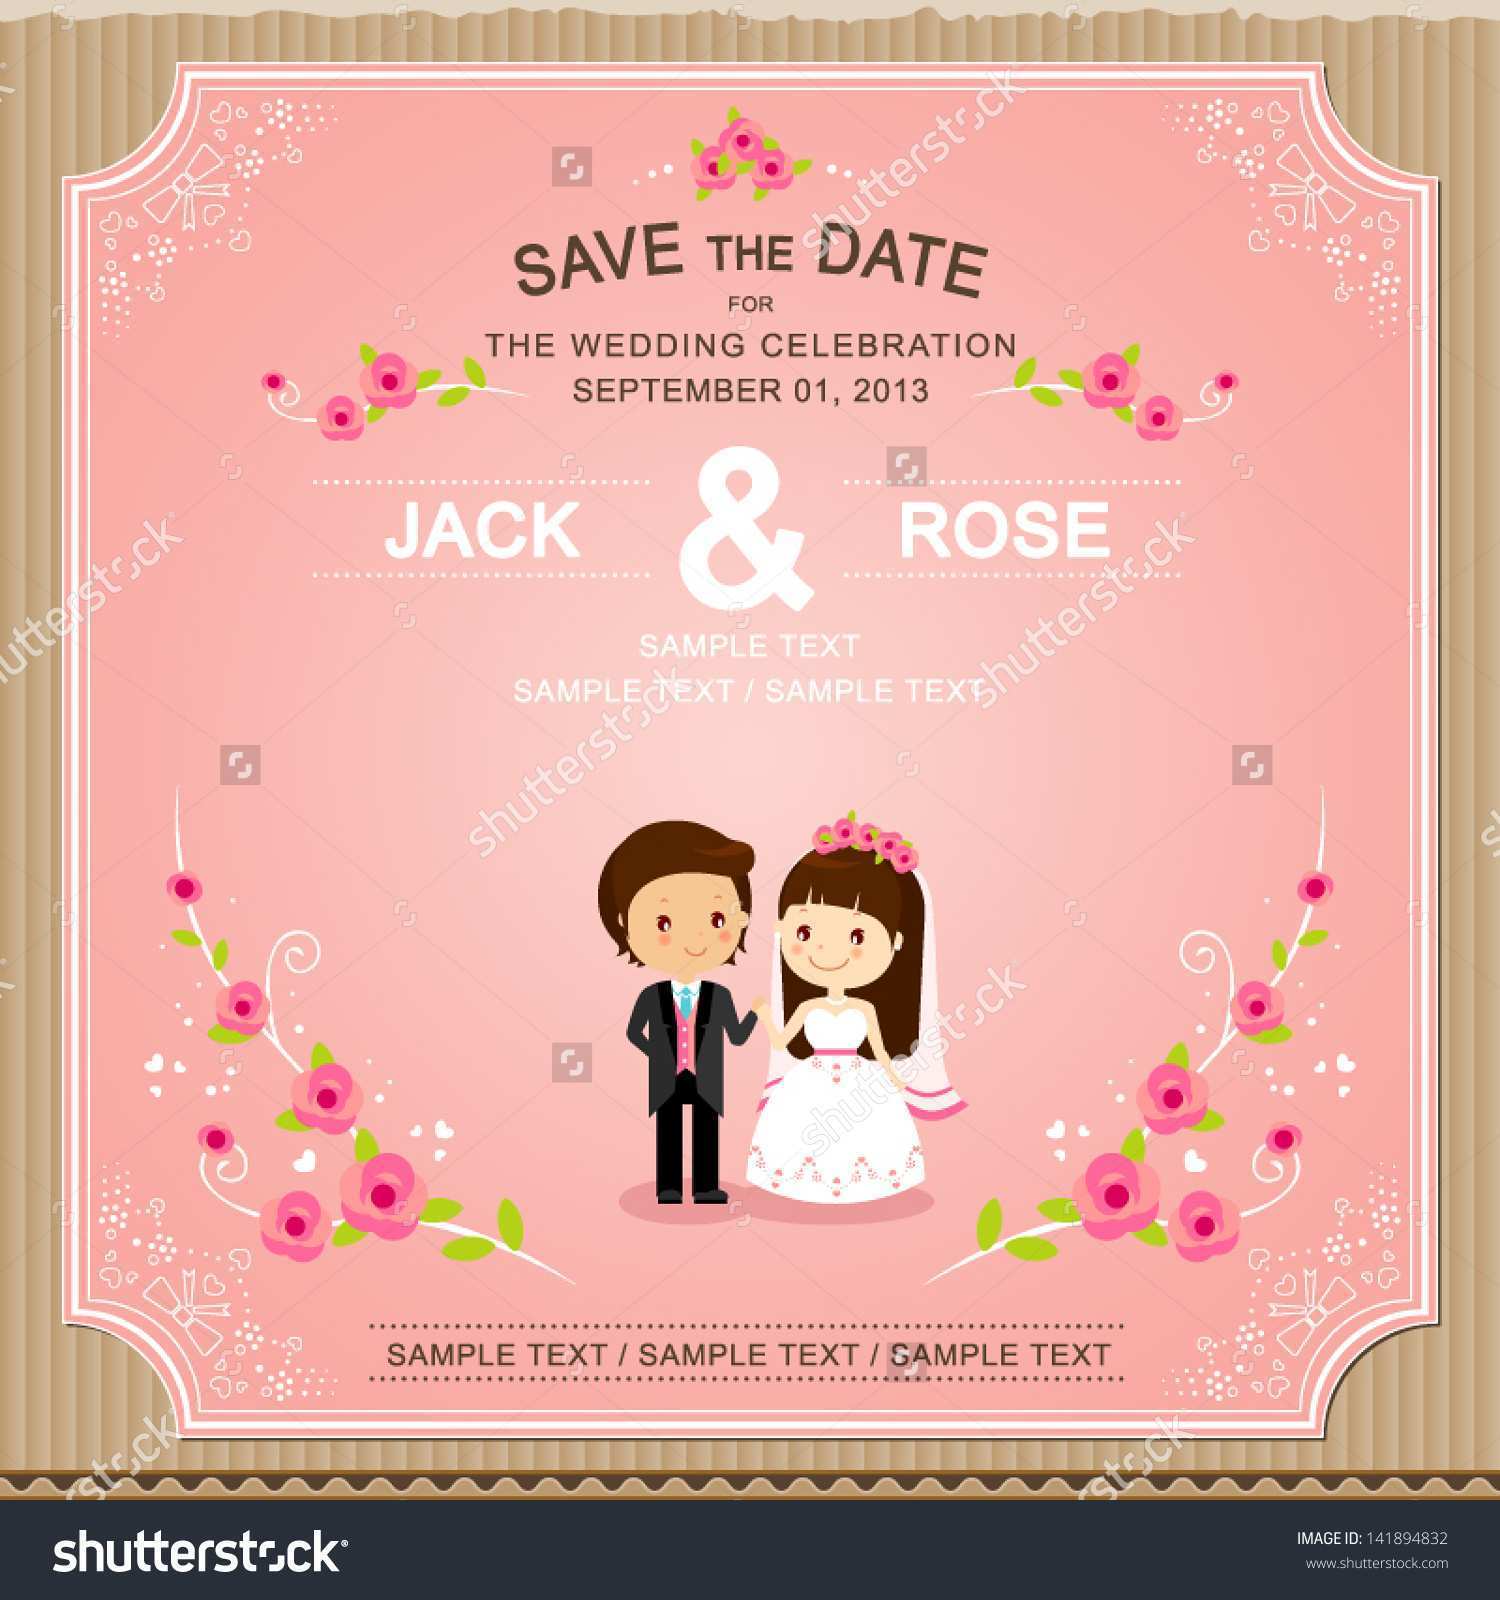 19 Create E Card Templates For Wedding Layouts with E Card Templates For Wedding